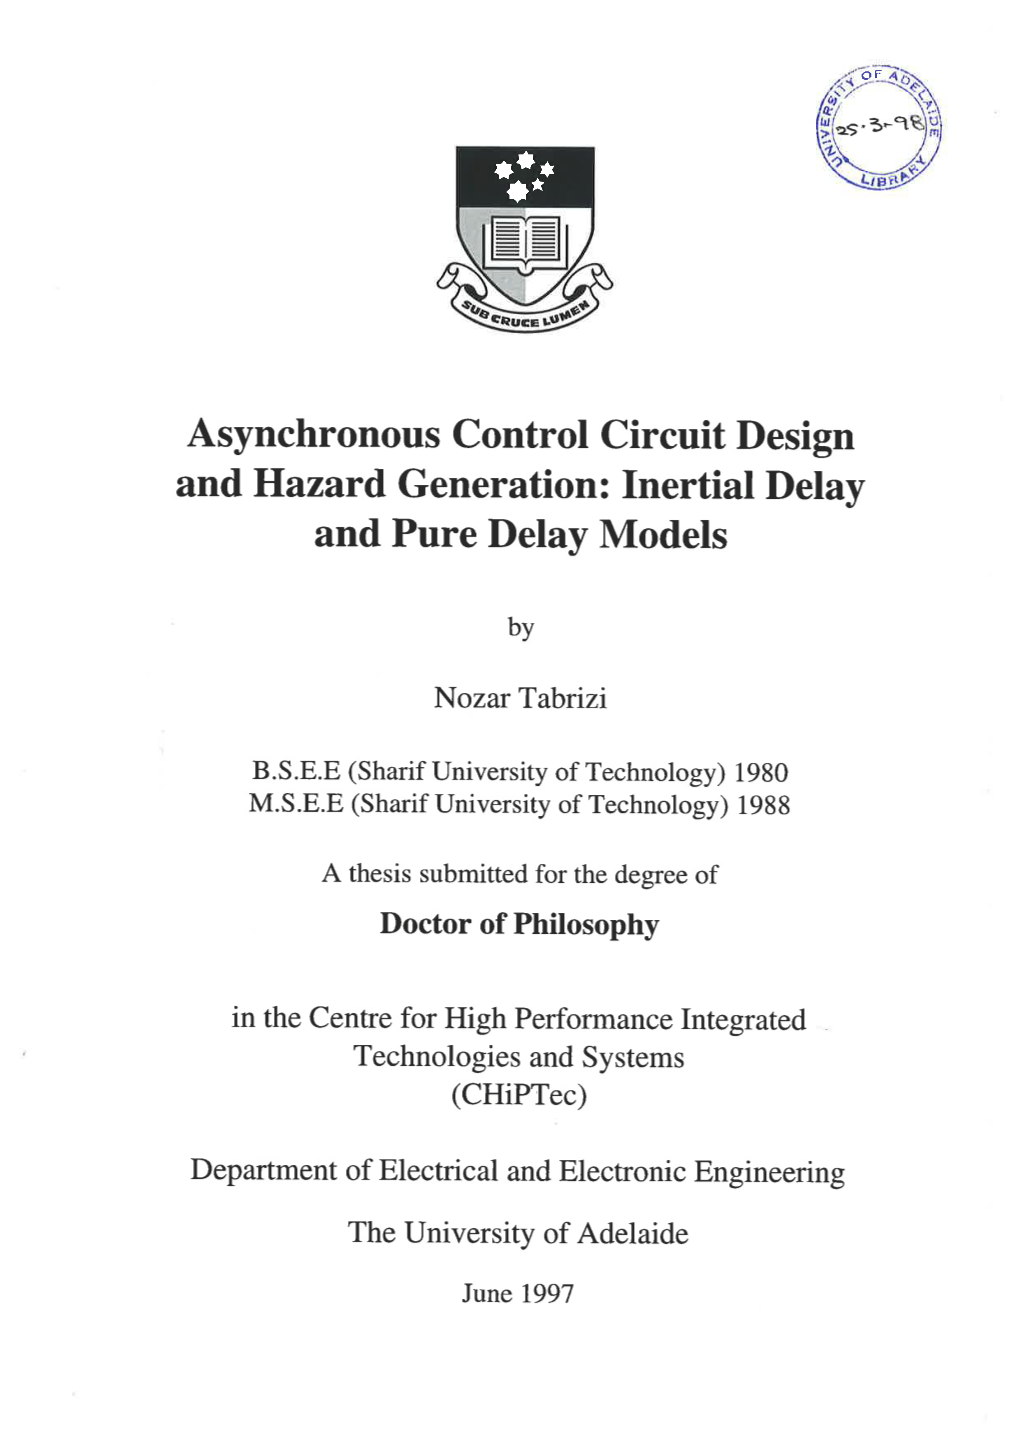 Asynchronous Control Circuit Design and Hazard Generation: Inertial Delay and Pure Delay Models